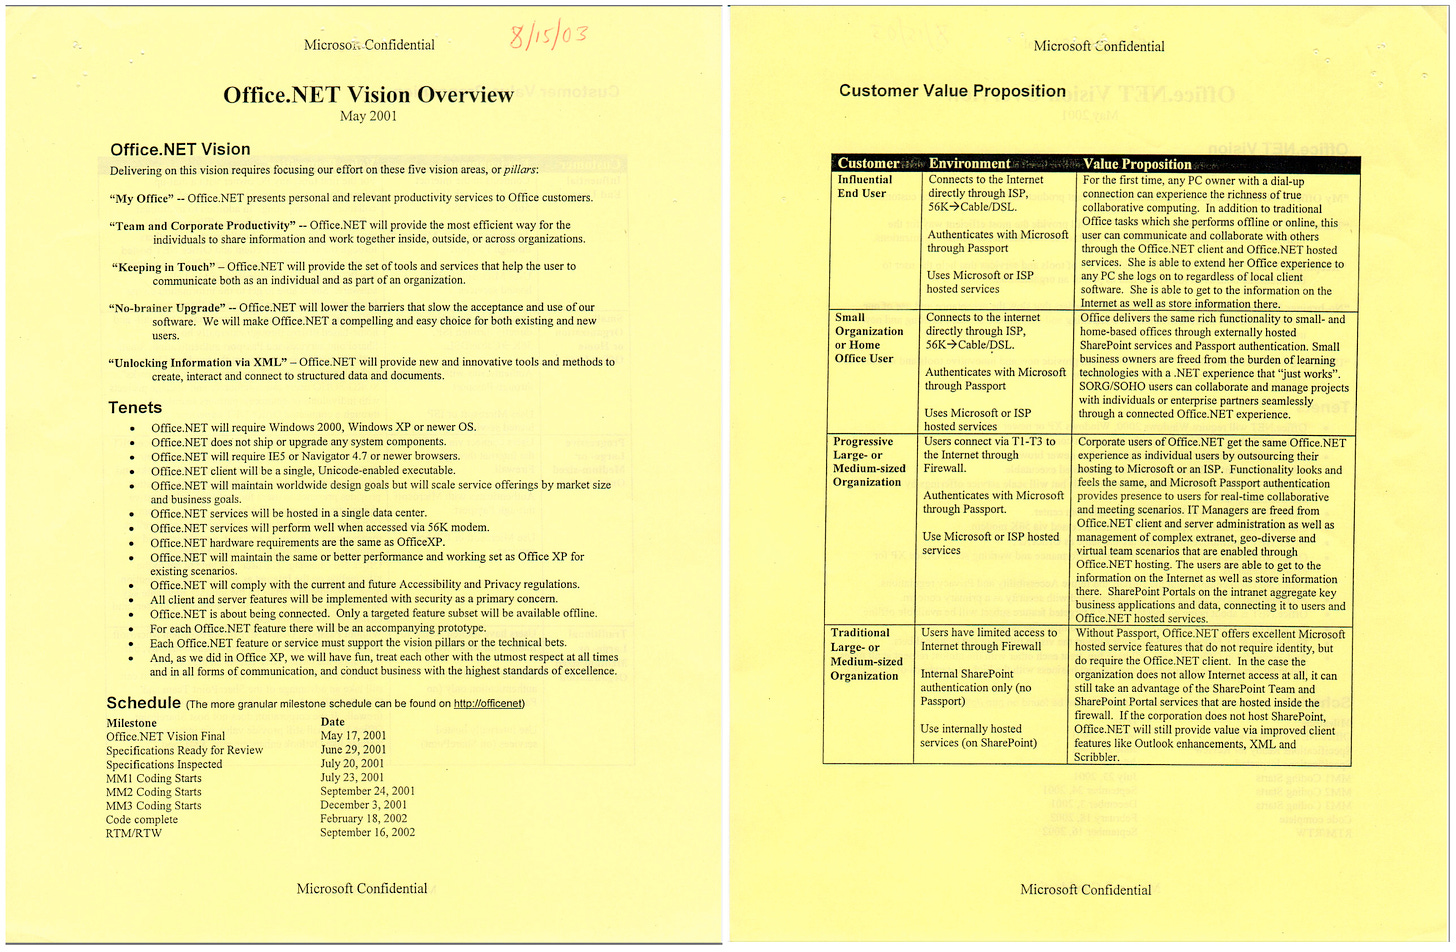 The Office.NET Vision overview. This includes a lot of text -- feel free to contact me for a screen readable format. The source is a scanned document.